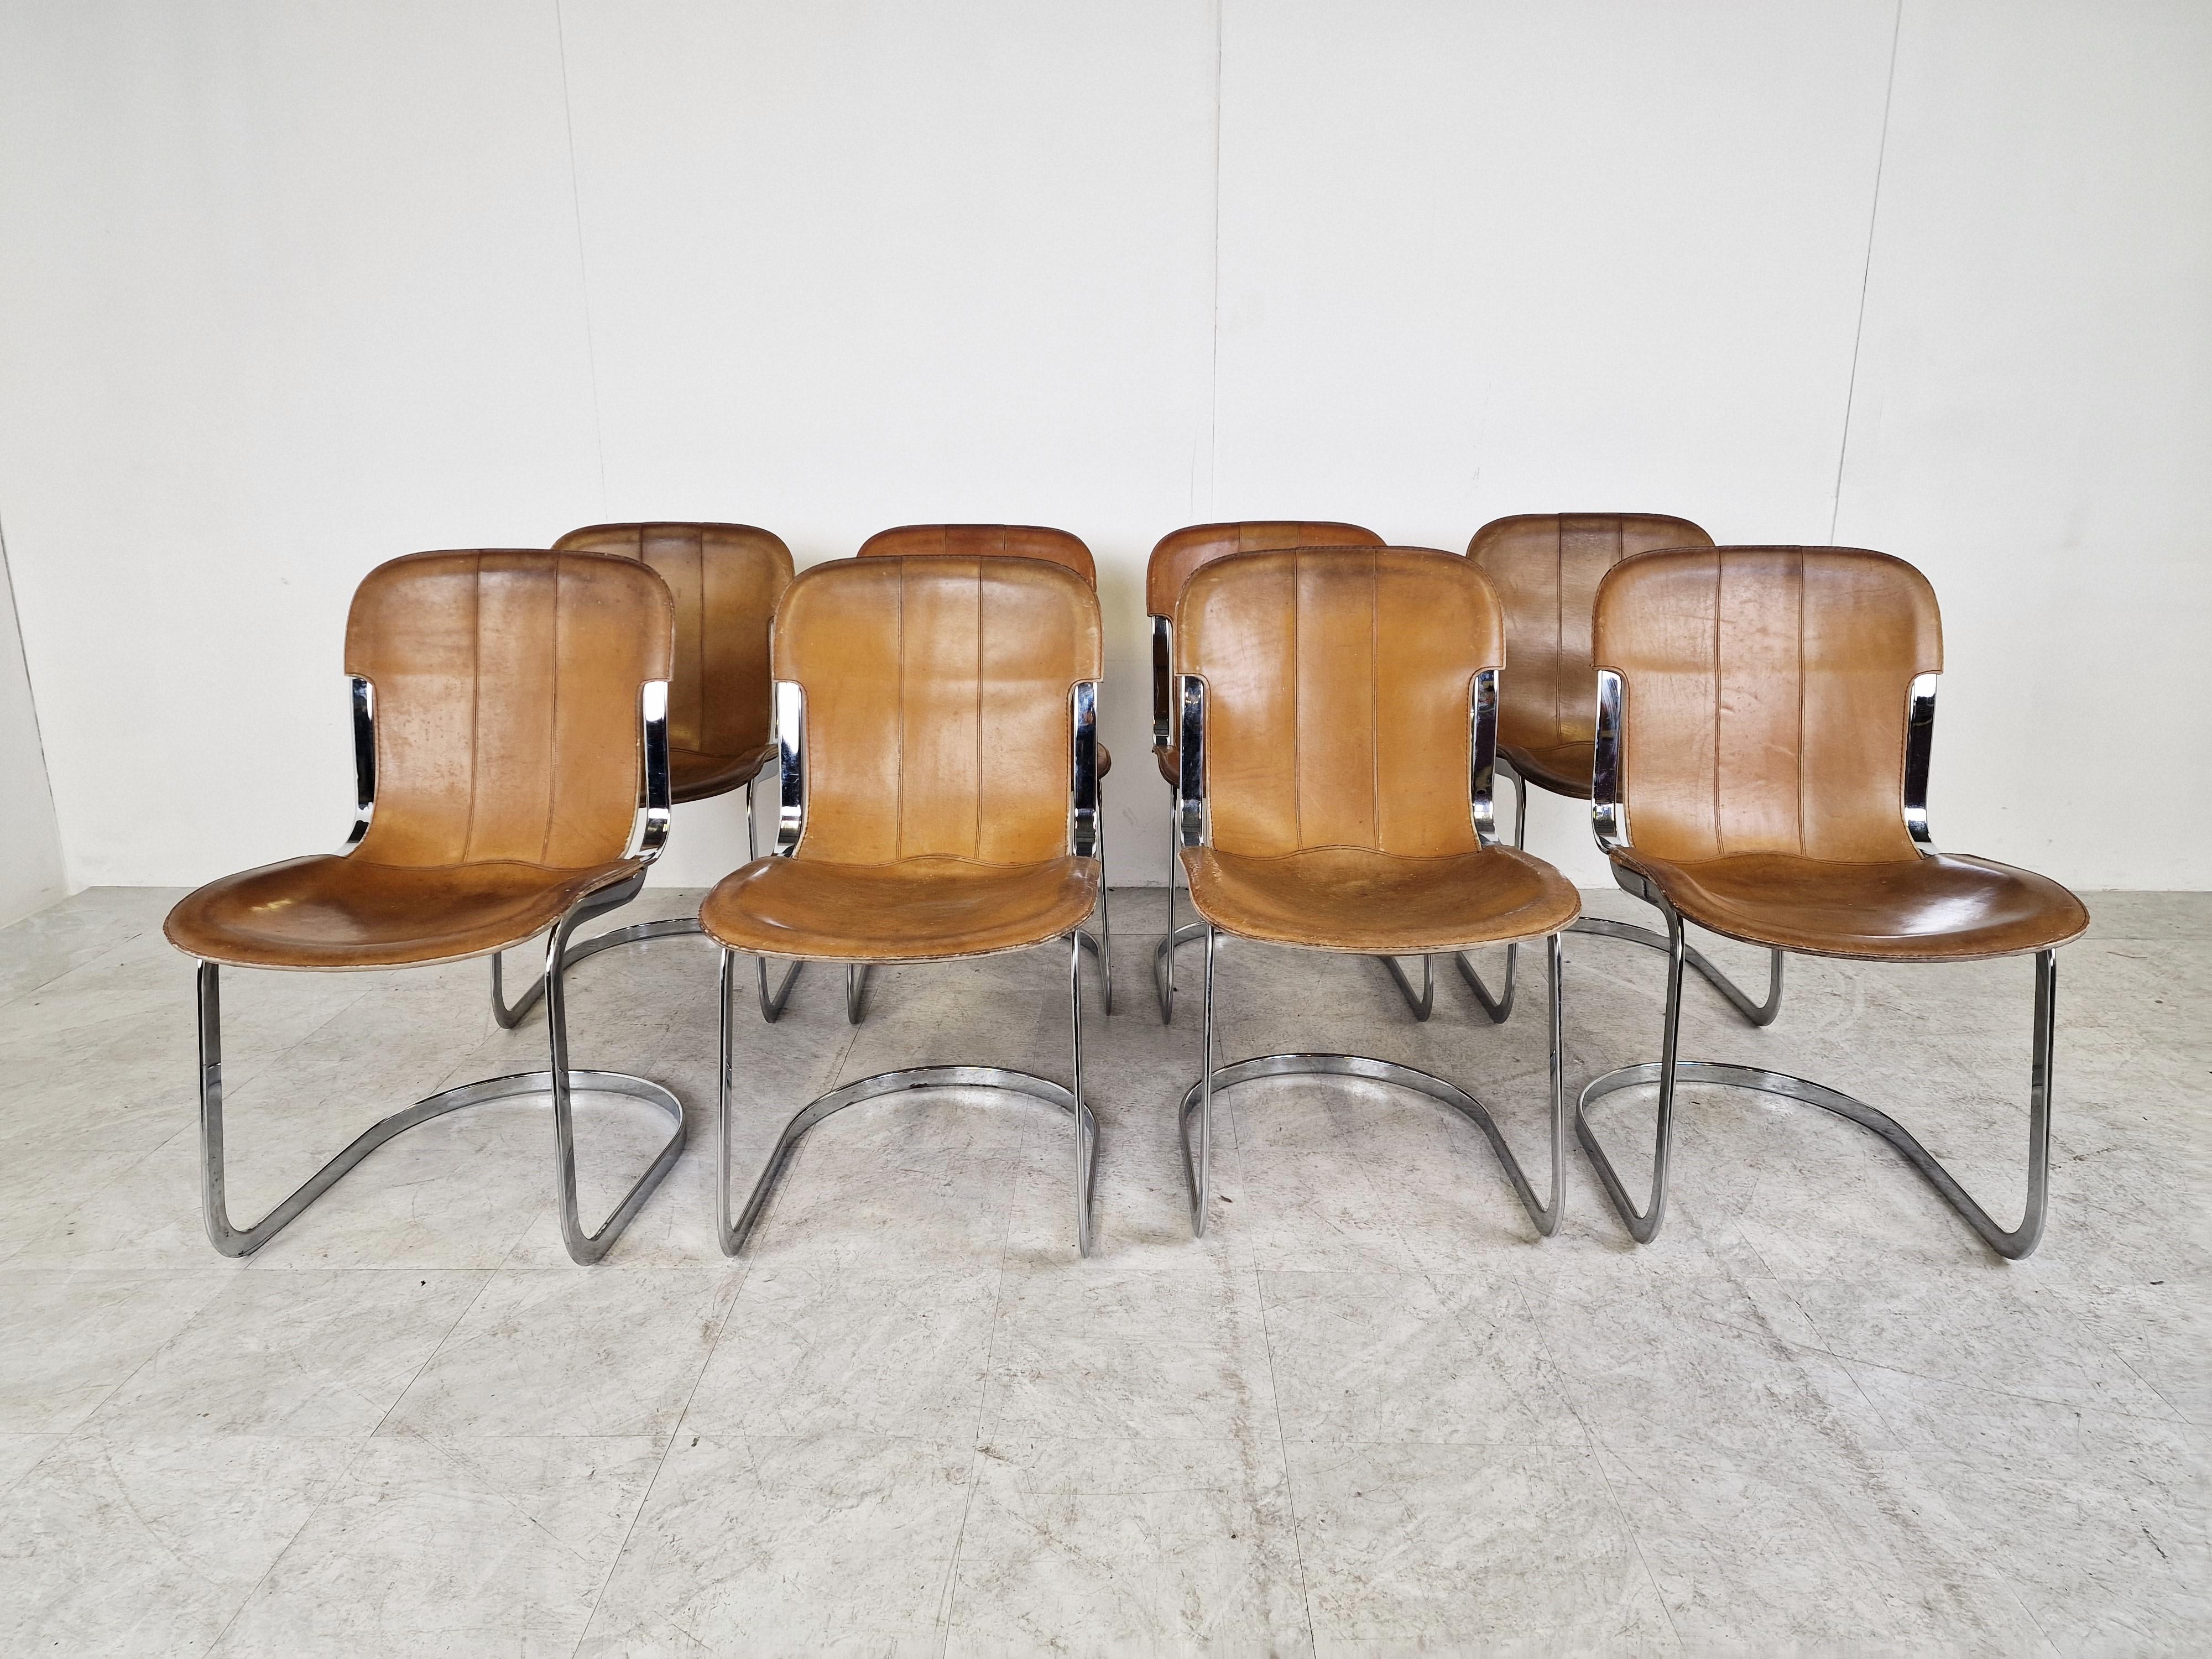 Italian Vintage Dining Chairs by Willy Rizzo for Cidue Set of 8, 1970s